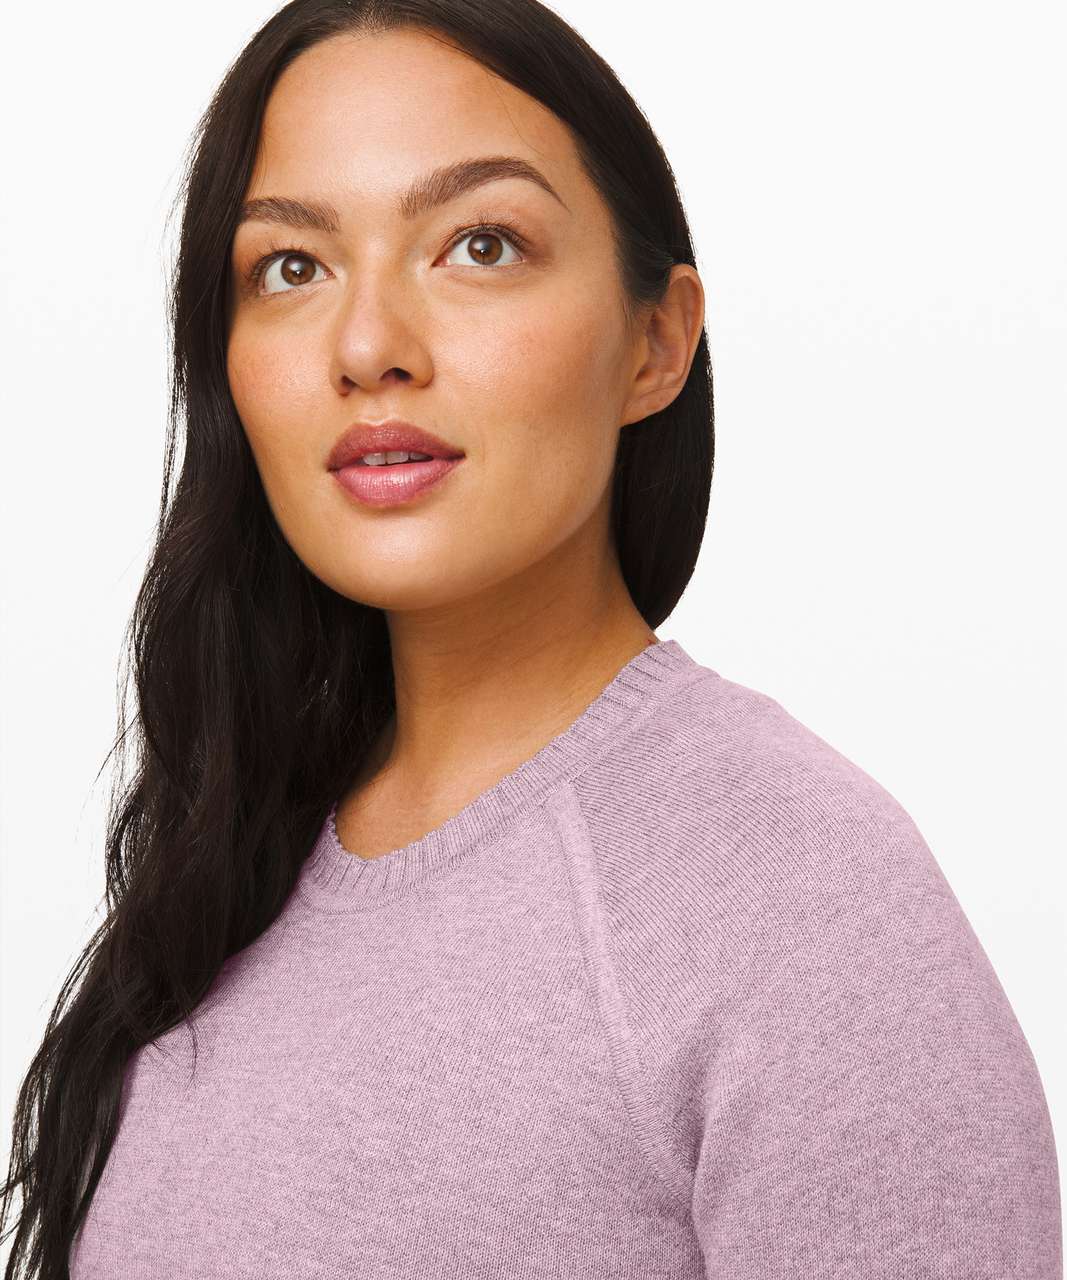 Lululemon Still Lotus Sweater *Reversible - Heathered Frosted Mulberry / Heathered Silver Lilac / Heathered Frosted Mulberry